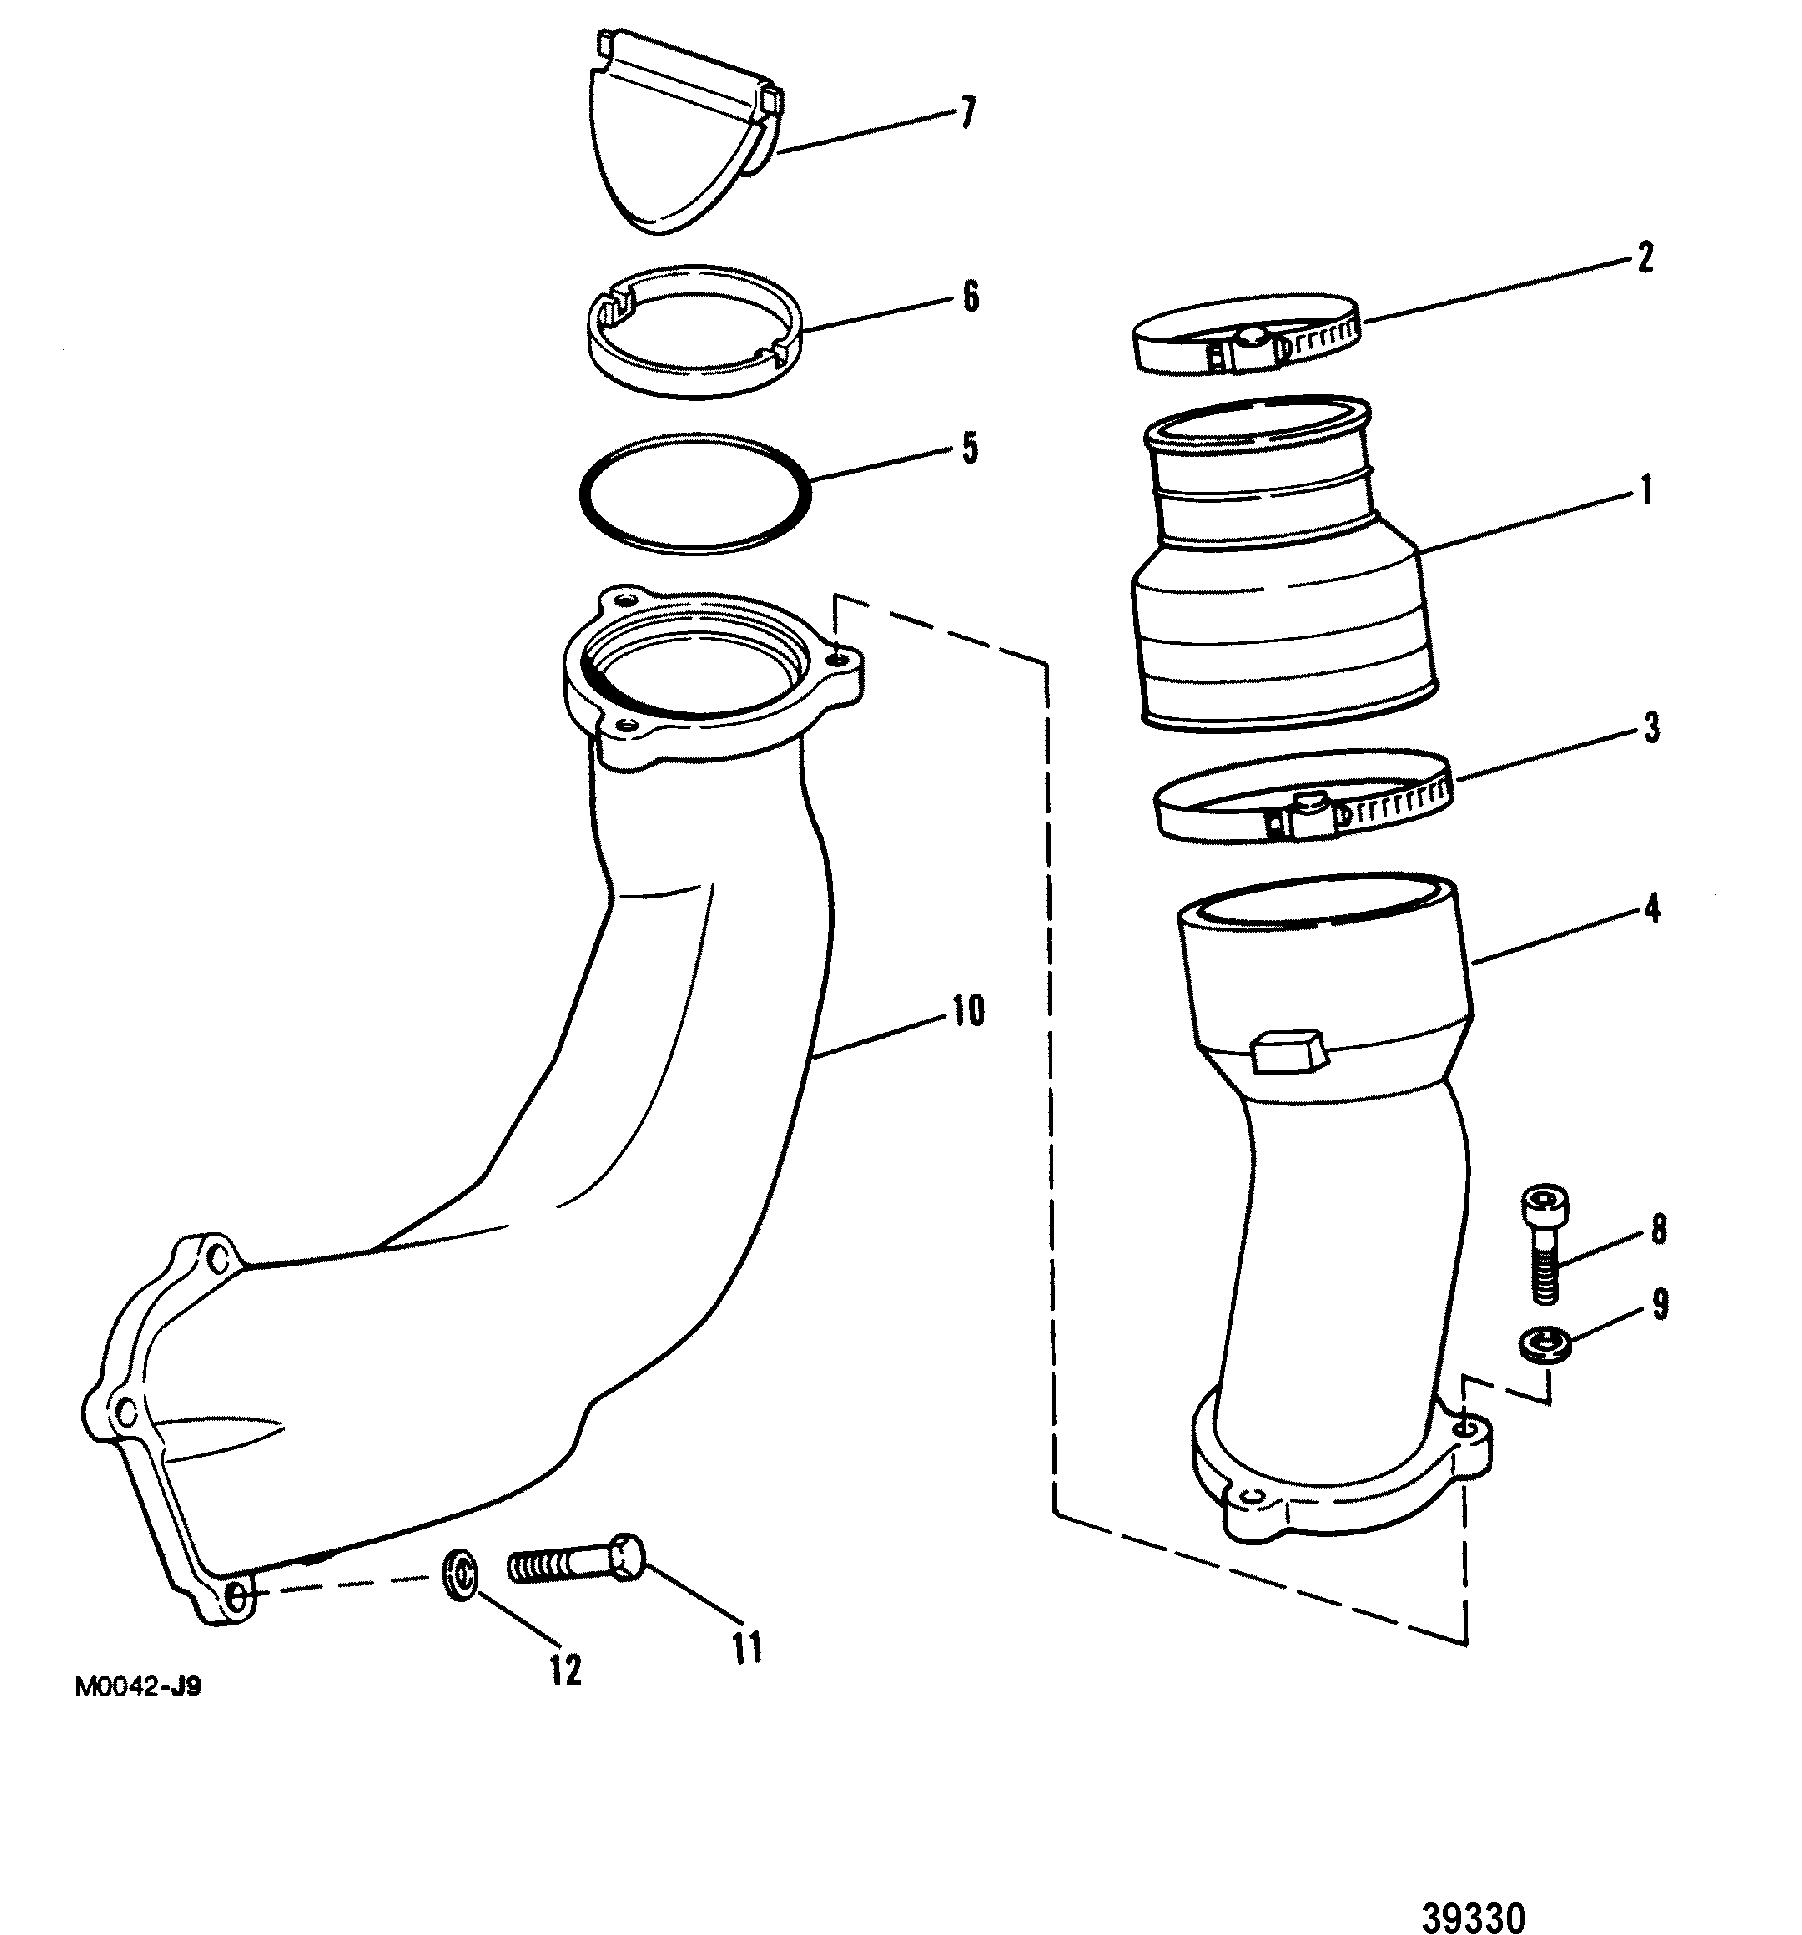 EXHAUST SYSTEM(OLD DESIGN)